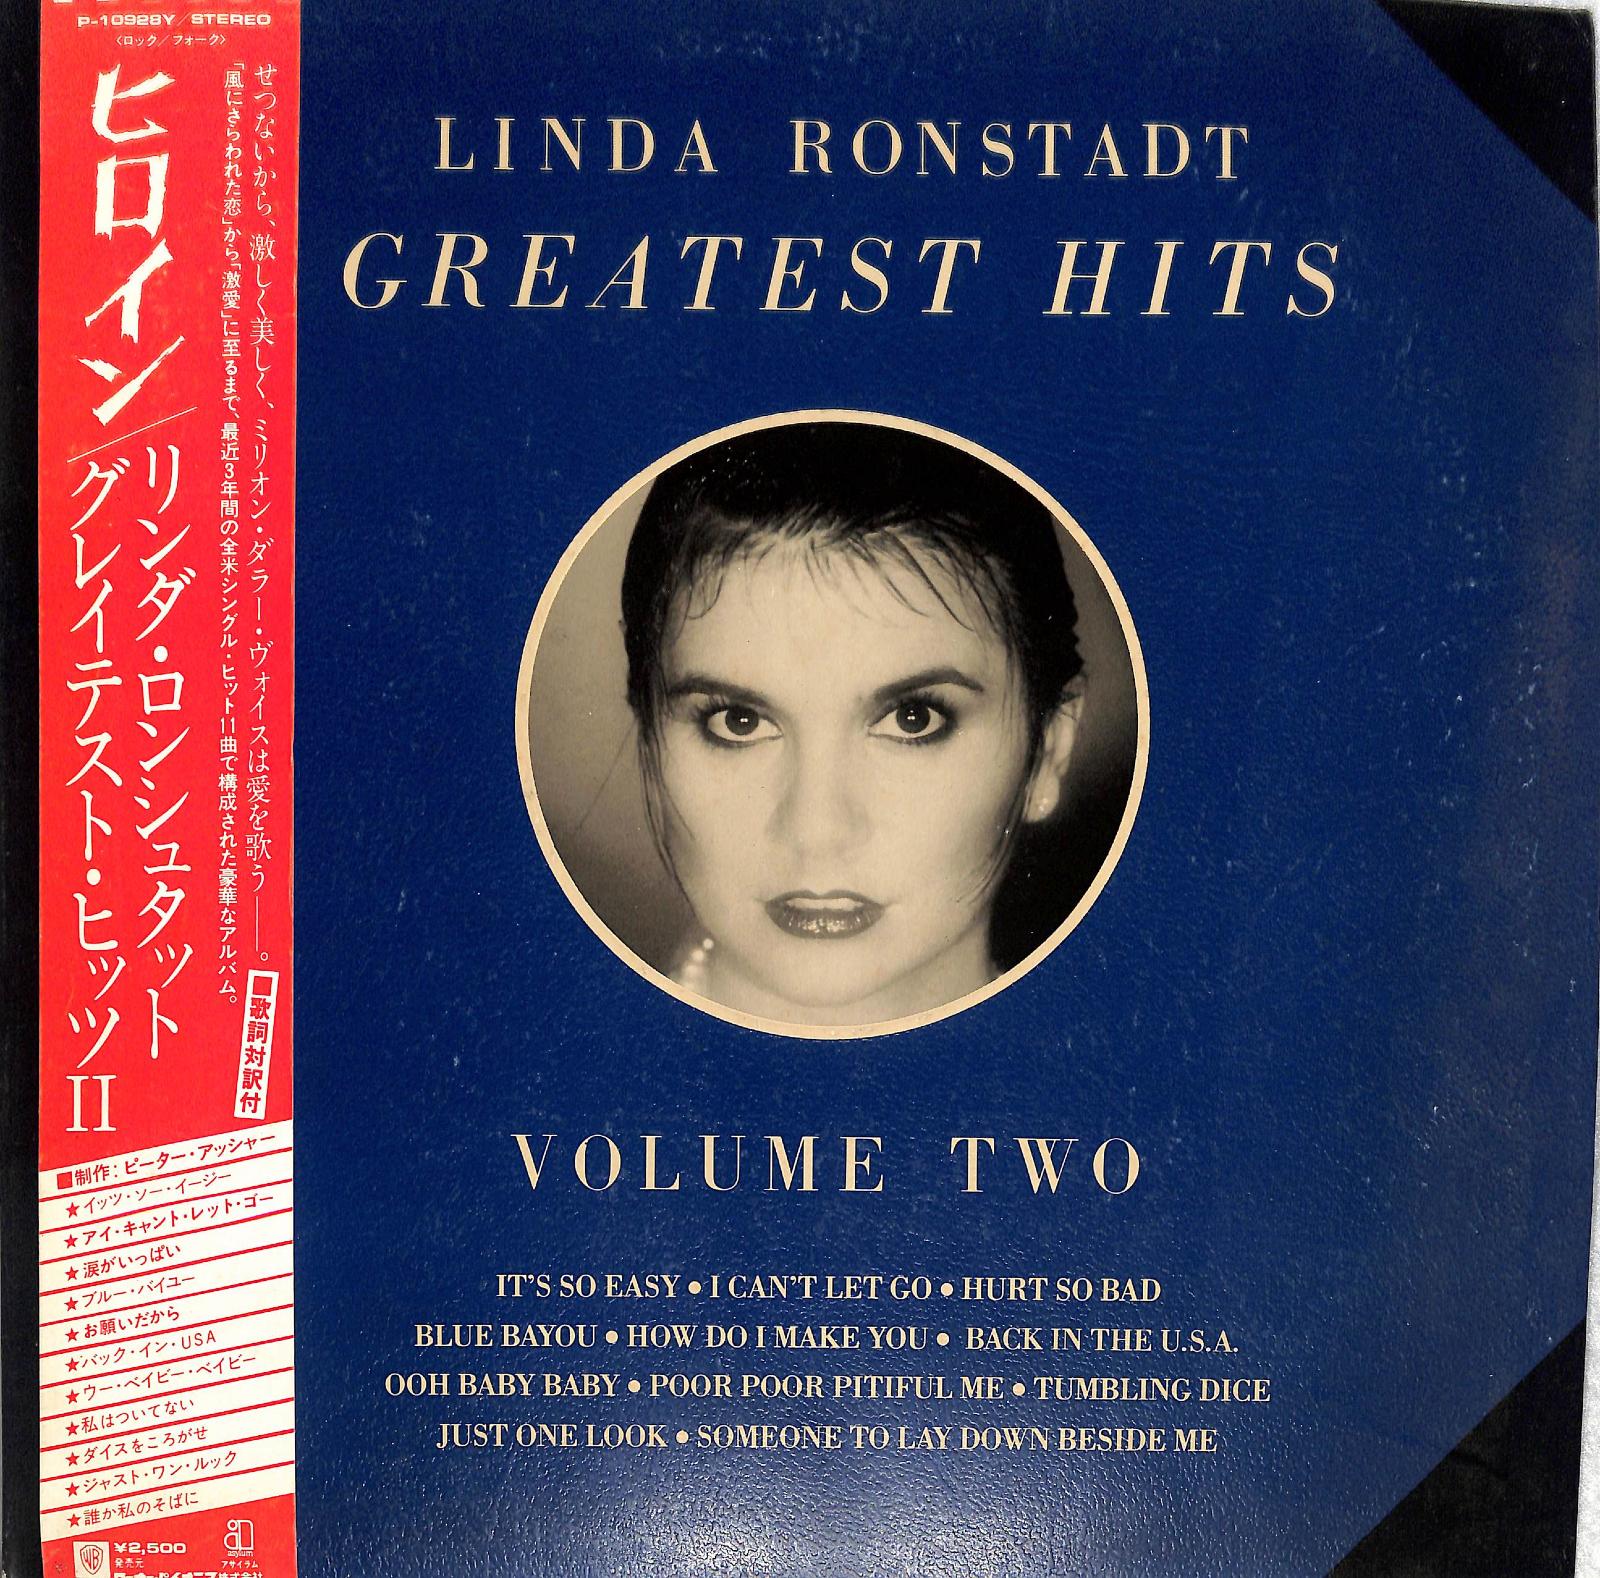 LINDA RONSTADT - Greatest Hits Volume Two